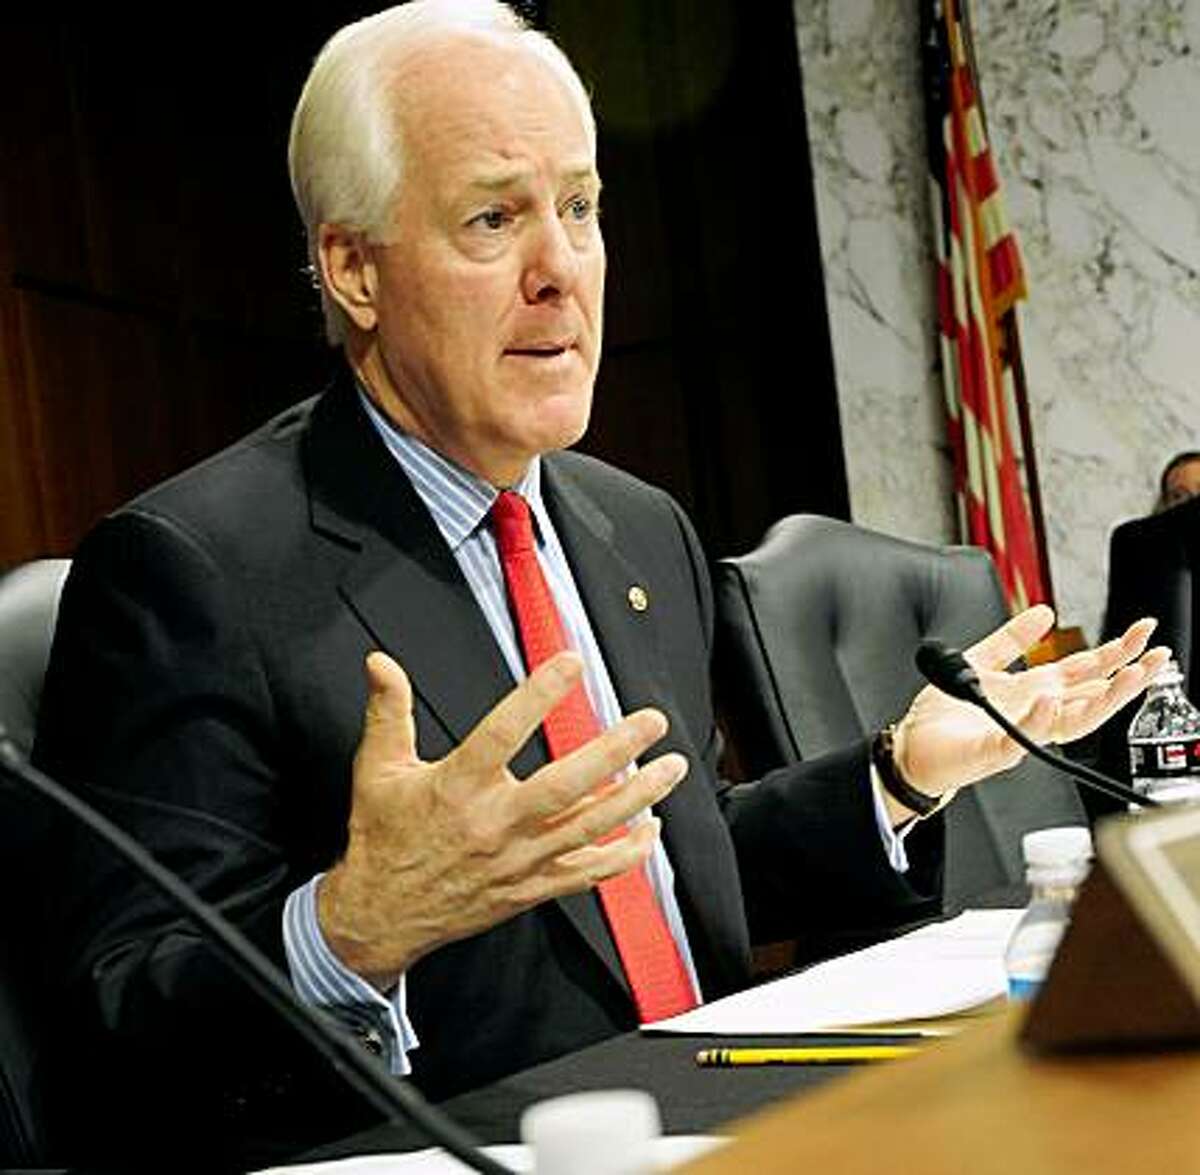 US Sen. John Cornyn,R-TX,, questions US Supreme Court Nominee Sonia Sotomayor on July 16, 2009 during the fourth day of confirmation hearings before the Senate Judiciary Committee on Capitol Hill in Washington, DC. AFP PHOTO/Karen BLEIER (Photo credit should read KAREN BLEIER/AFP/Getty Images)